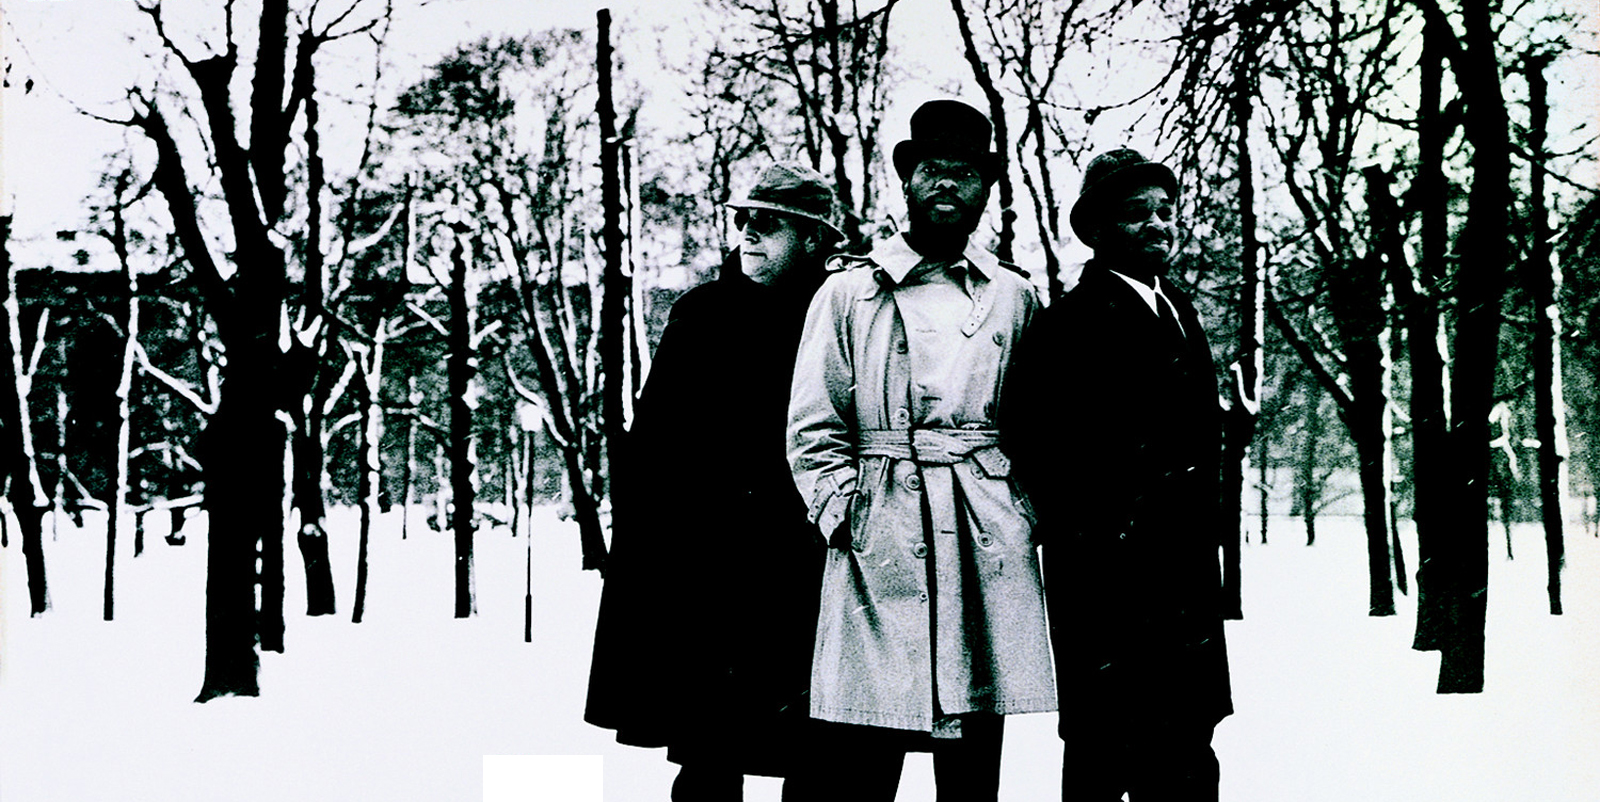 ORNETTE COLEMAN TRIO AT THE GOLDEN CIRCLE STOCKHOLM - Blue Note